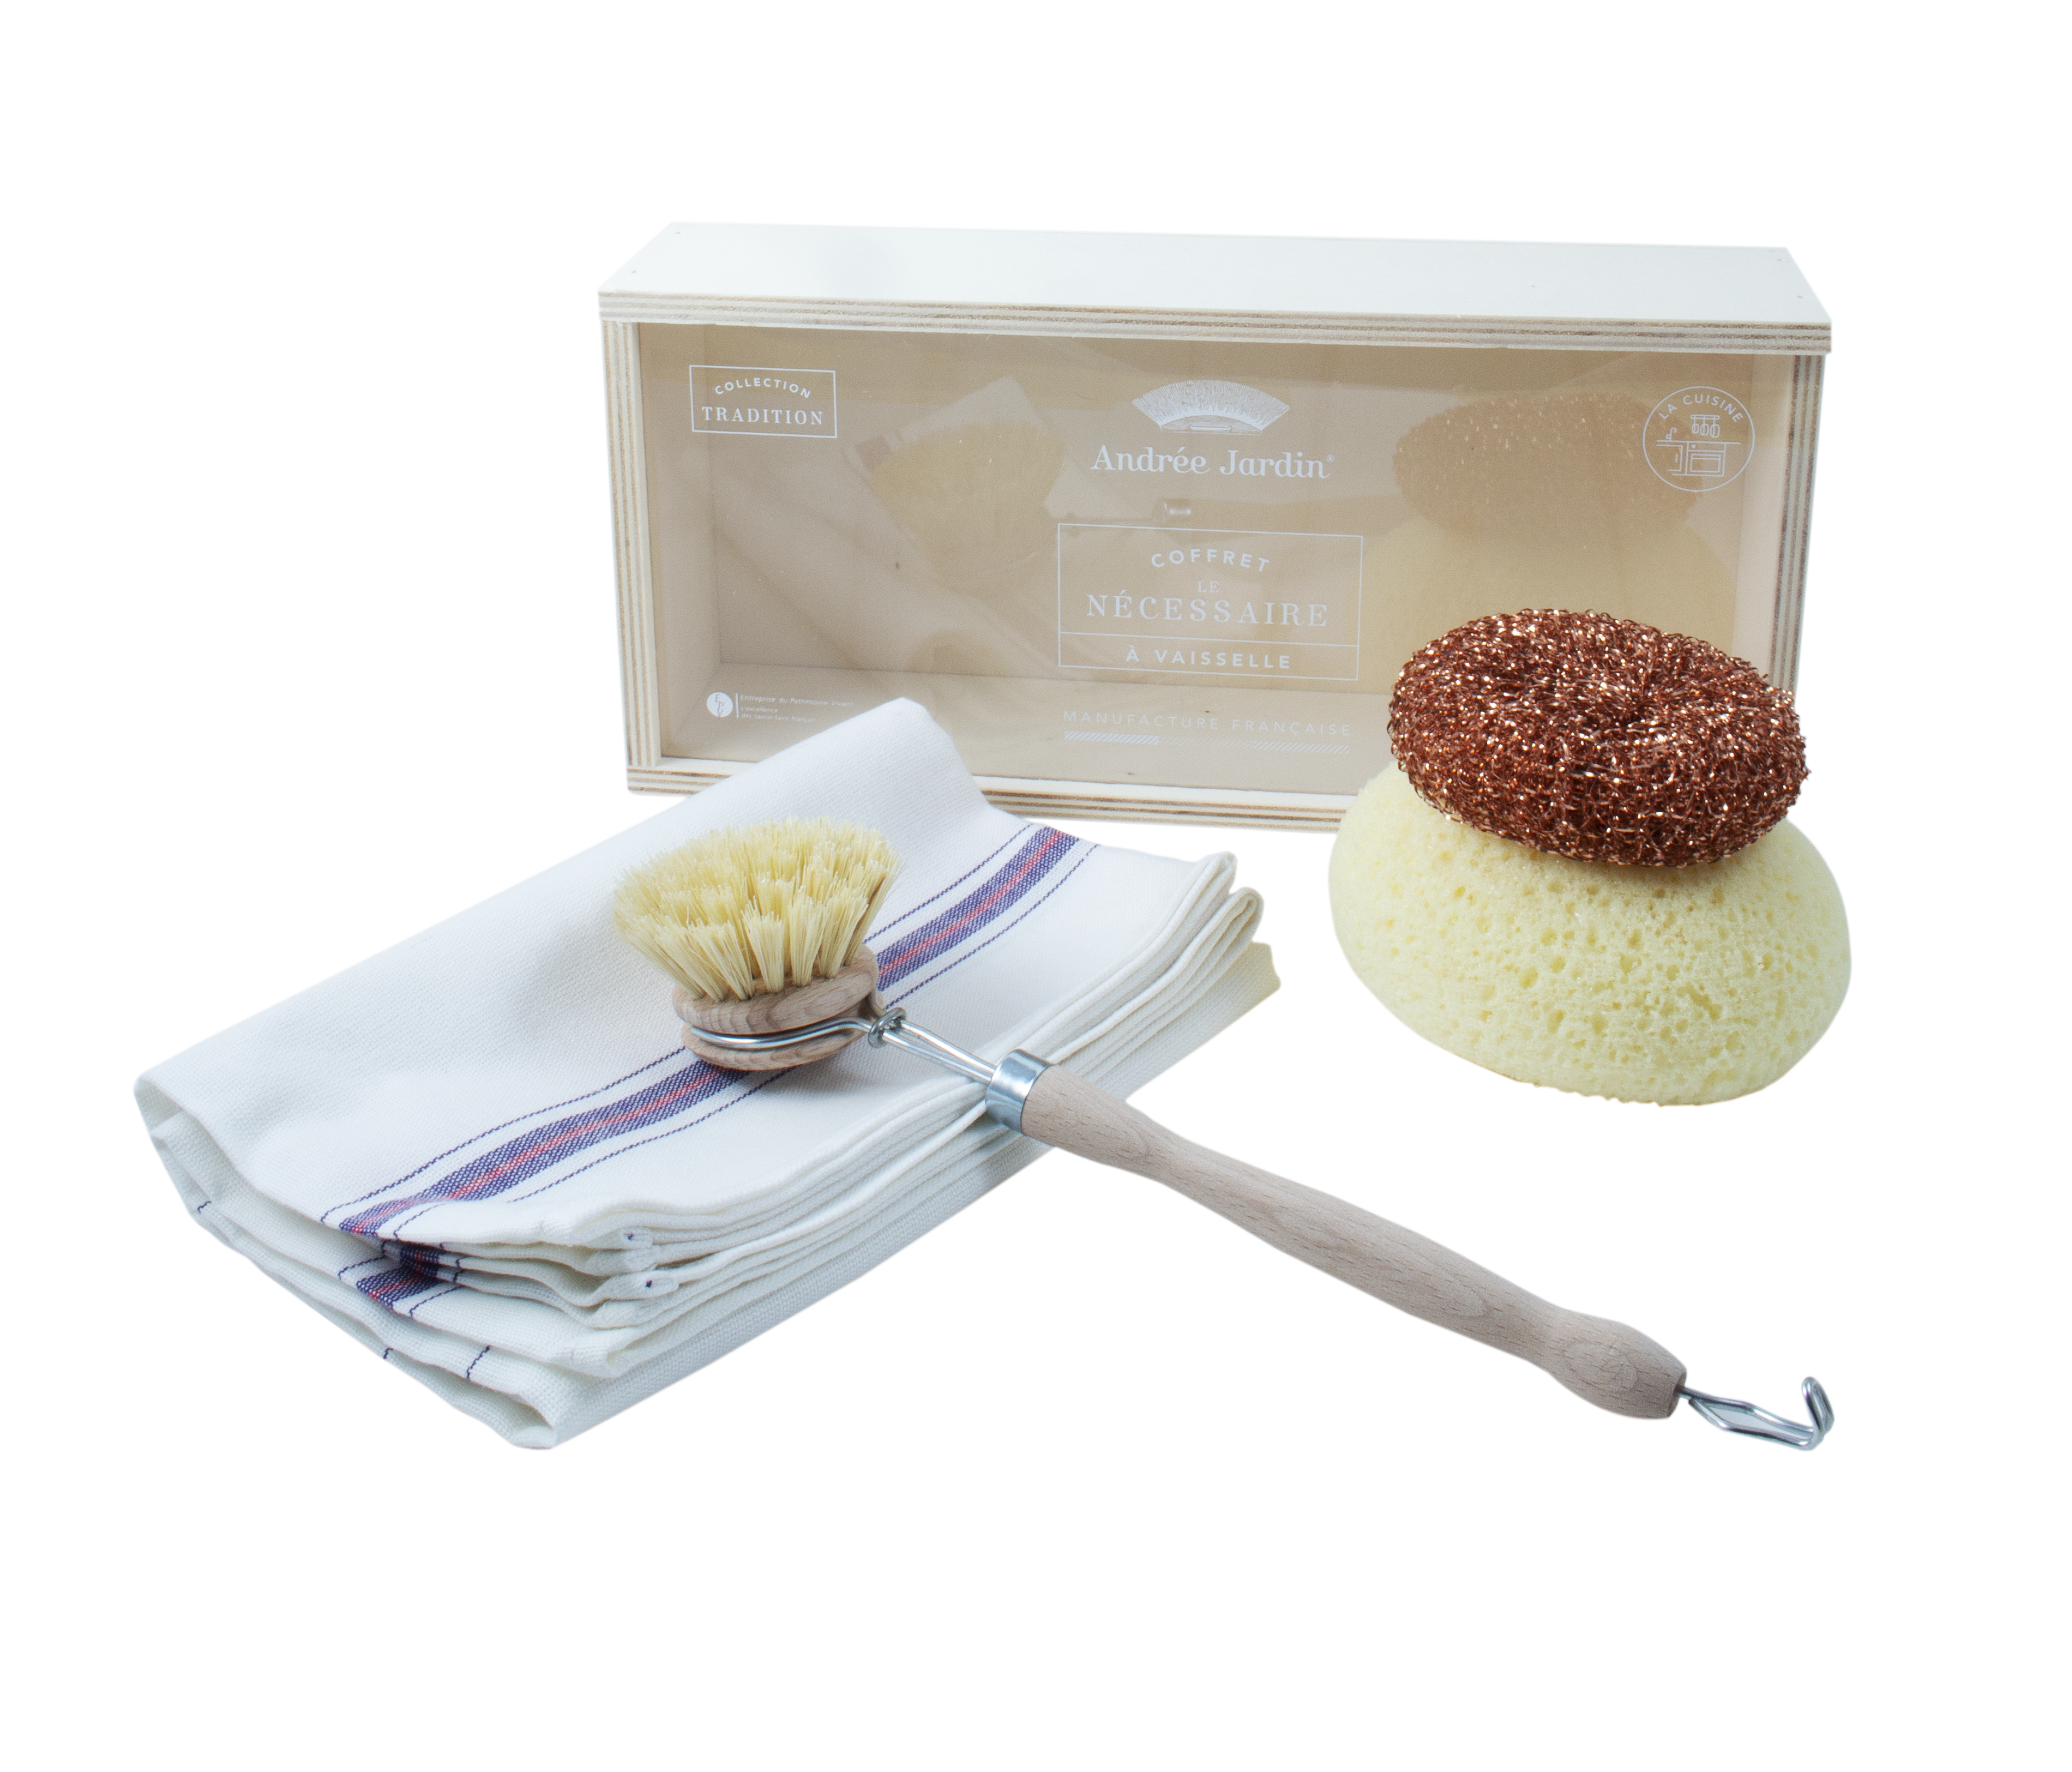 Andrée Jardin "Tradition" Dish Kit in Wooden Box Sponges & Scouring Pads Andrée Jardin Andrée Jardin Back in stock Brand_Andrée Jardin Home_Household Cleaning Kitchen_Accessories Kitchen_Kitchenware La Cuisine AndreeJardinNewDishKit_Out_2